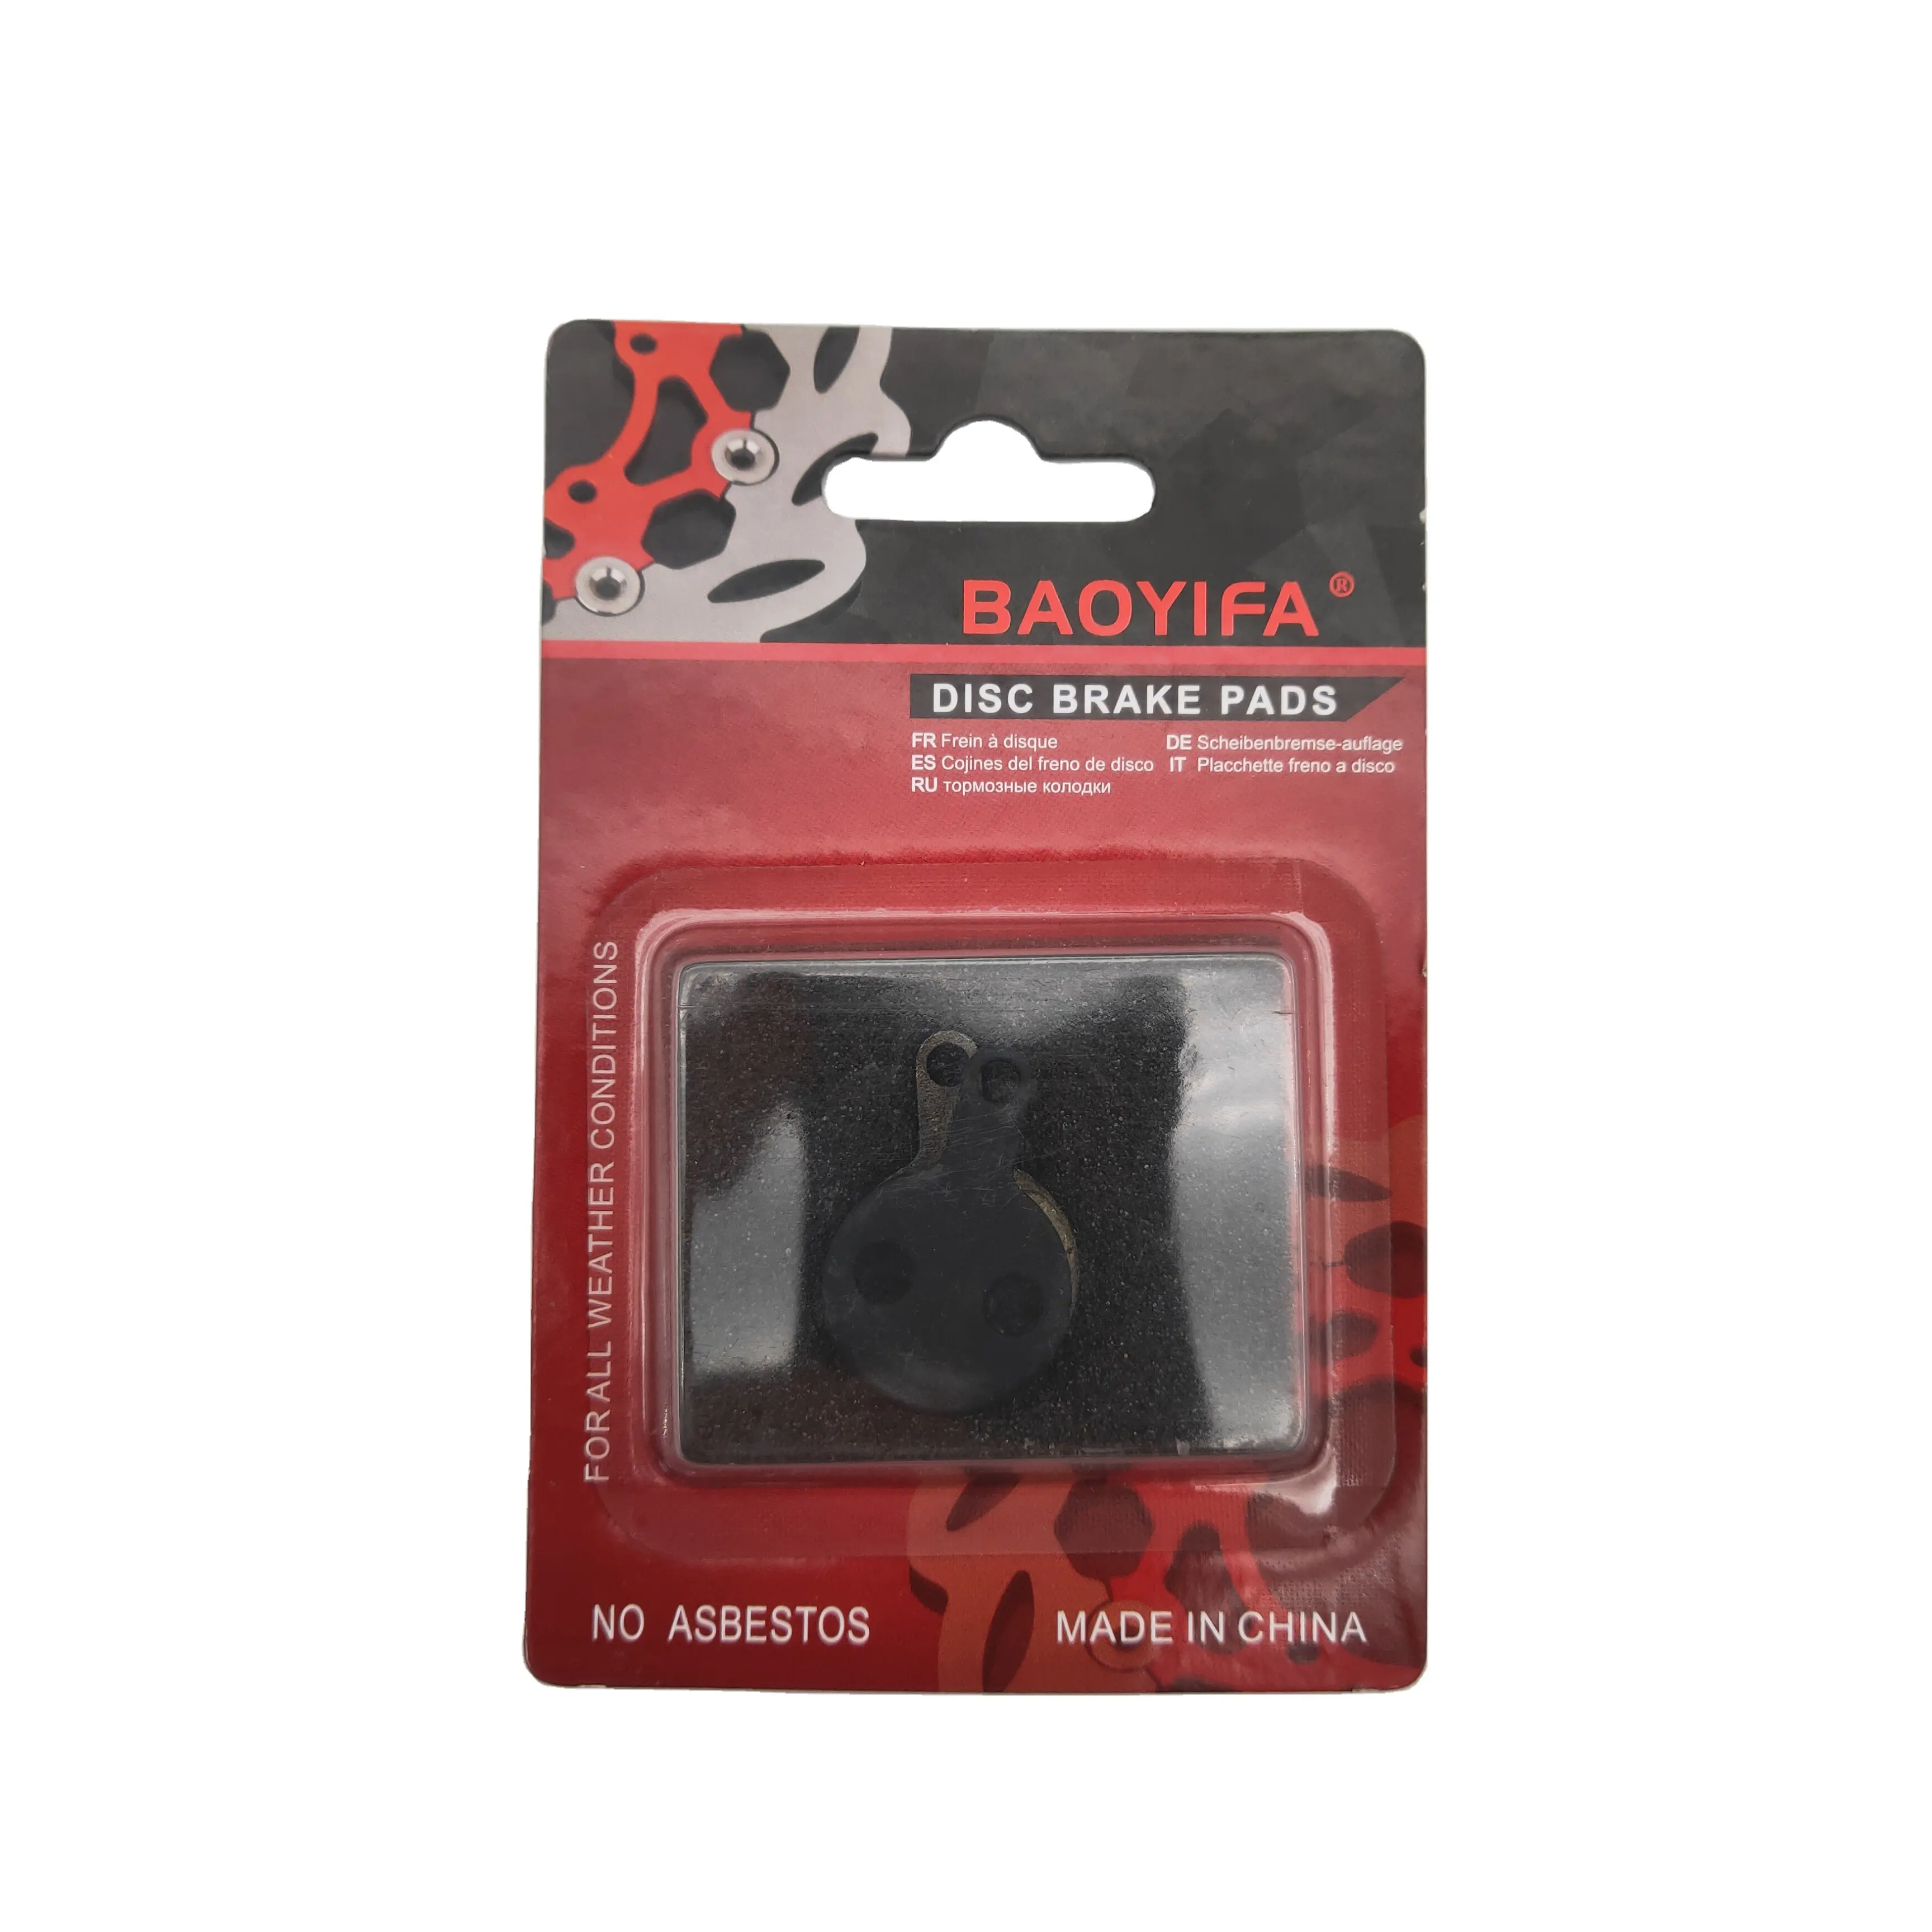 High quality card mounted bicycle accessories / bicycle brake pad / bb8 disc brake  bb8 disc brake pads with Upper holes BAOYIFA